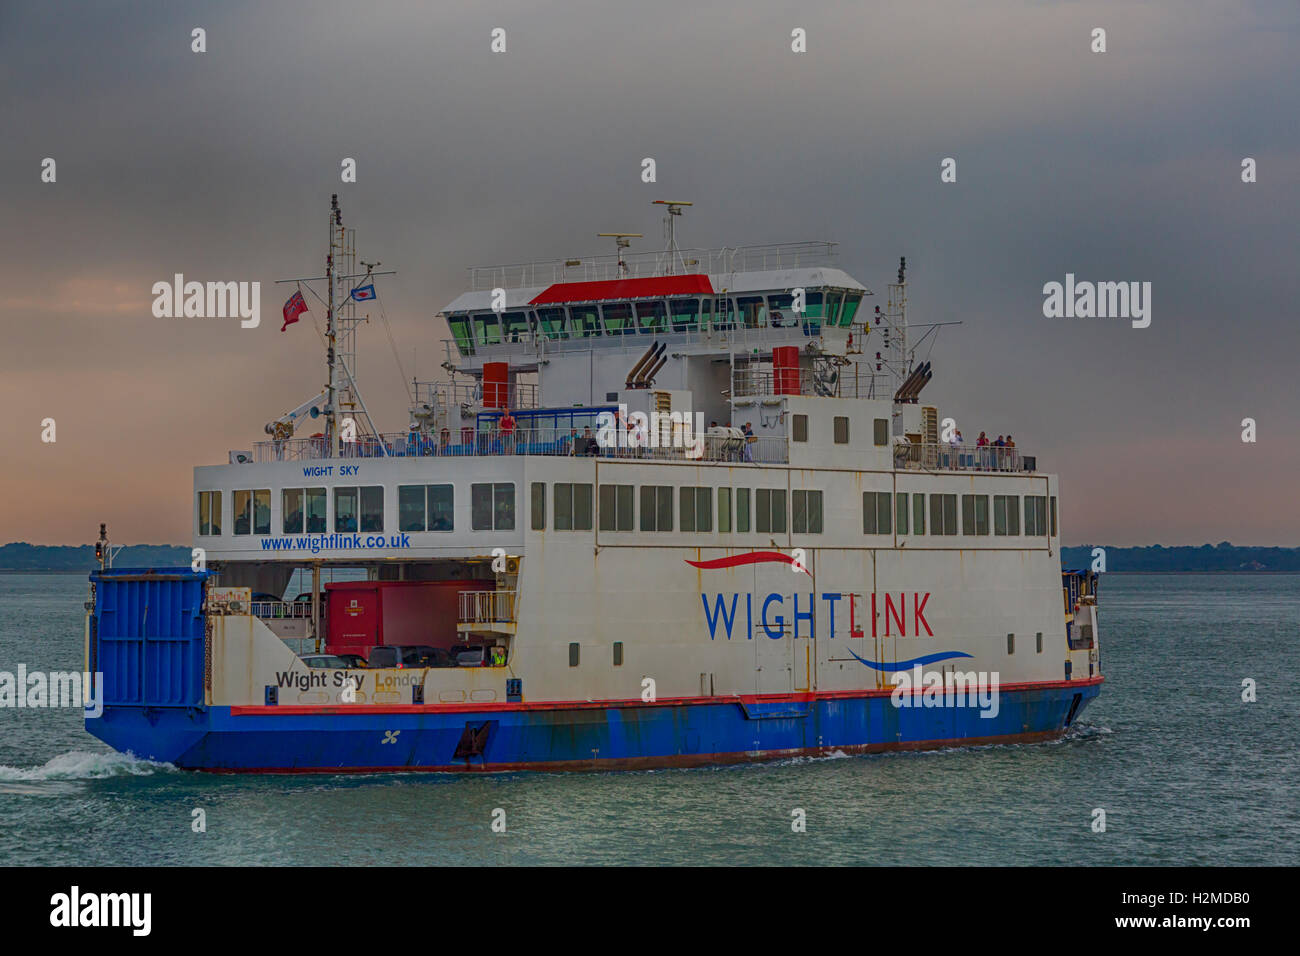 Wightlink ferry car ferry leaving Yarmouth on the Isle of Wight across the Solent to the mainland Lymington, Hampshire UK in September - HDR effect Stock Photo